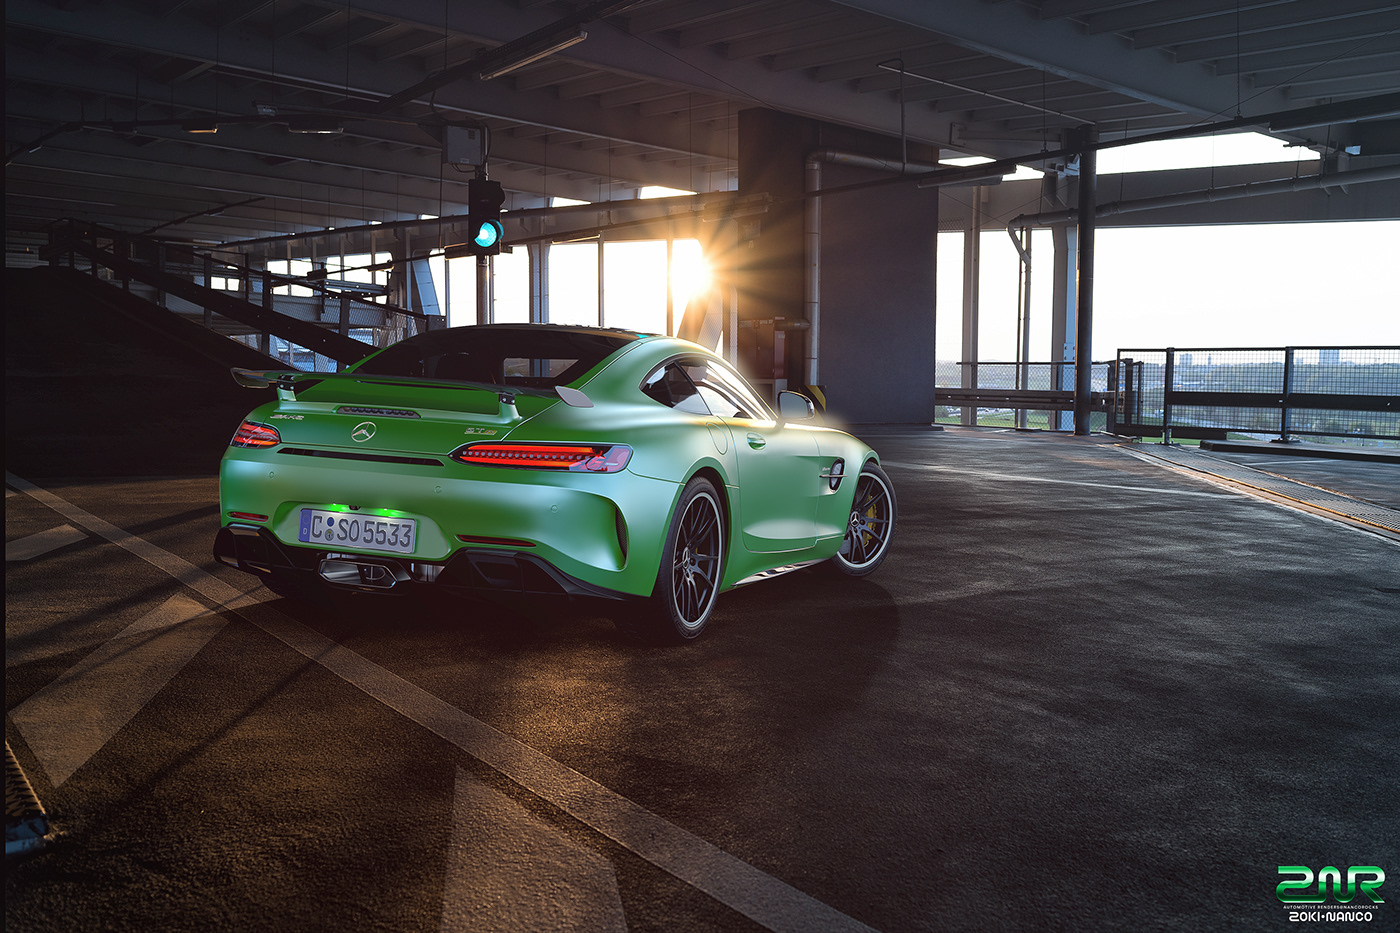 #3d #cg #cgi #mercedes #benz #amg #gtr #render #concept #prototype #supercar #hypercar #future #racing #custom #unique #track #wide #performance #coupe #road #luxury